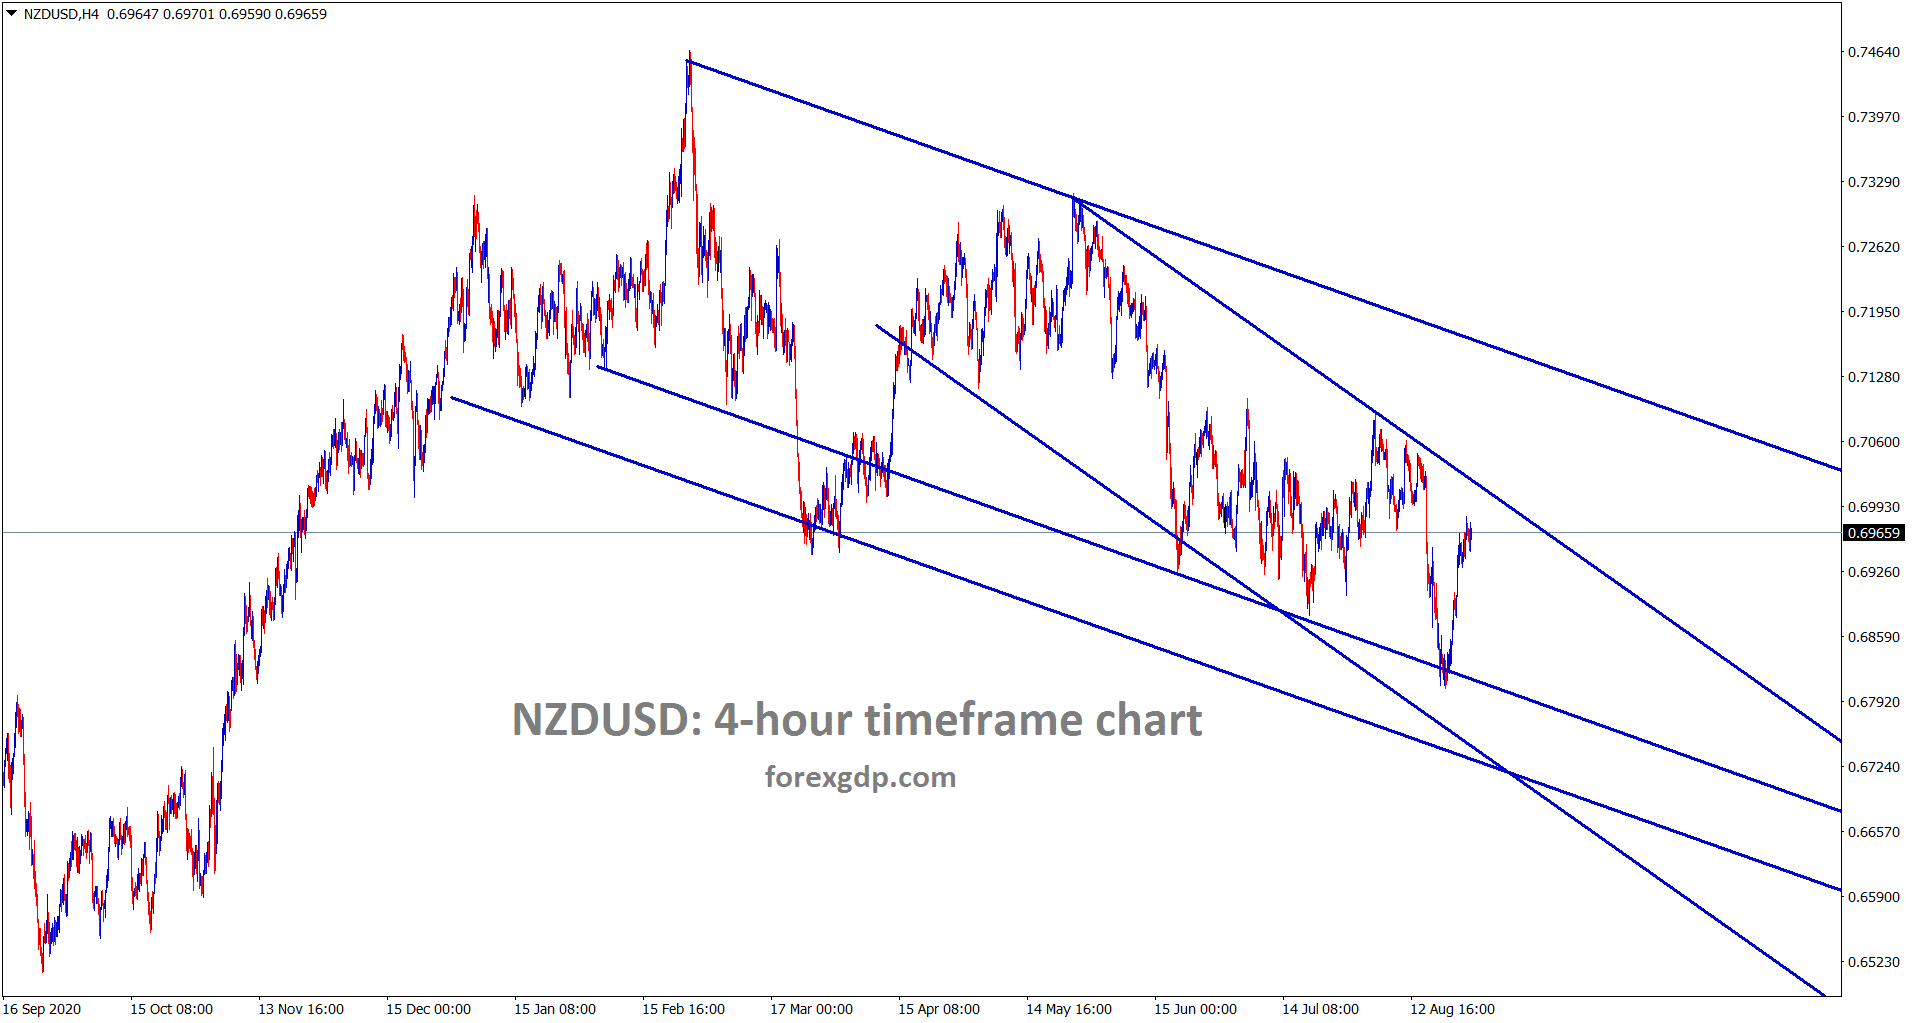 NZDUSD is moving in a descending channel